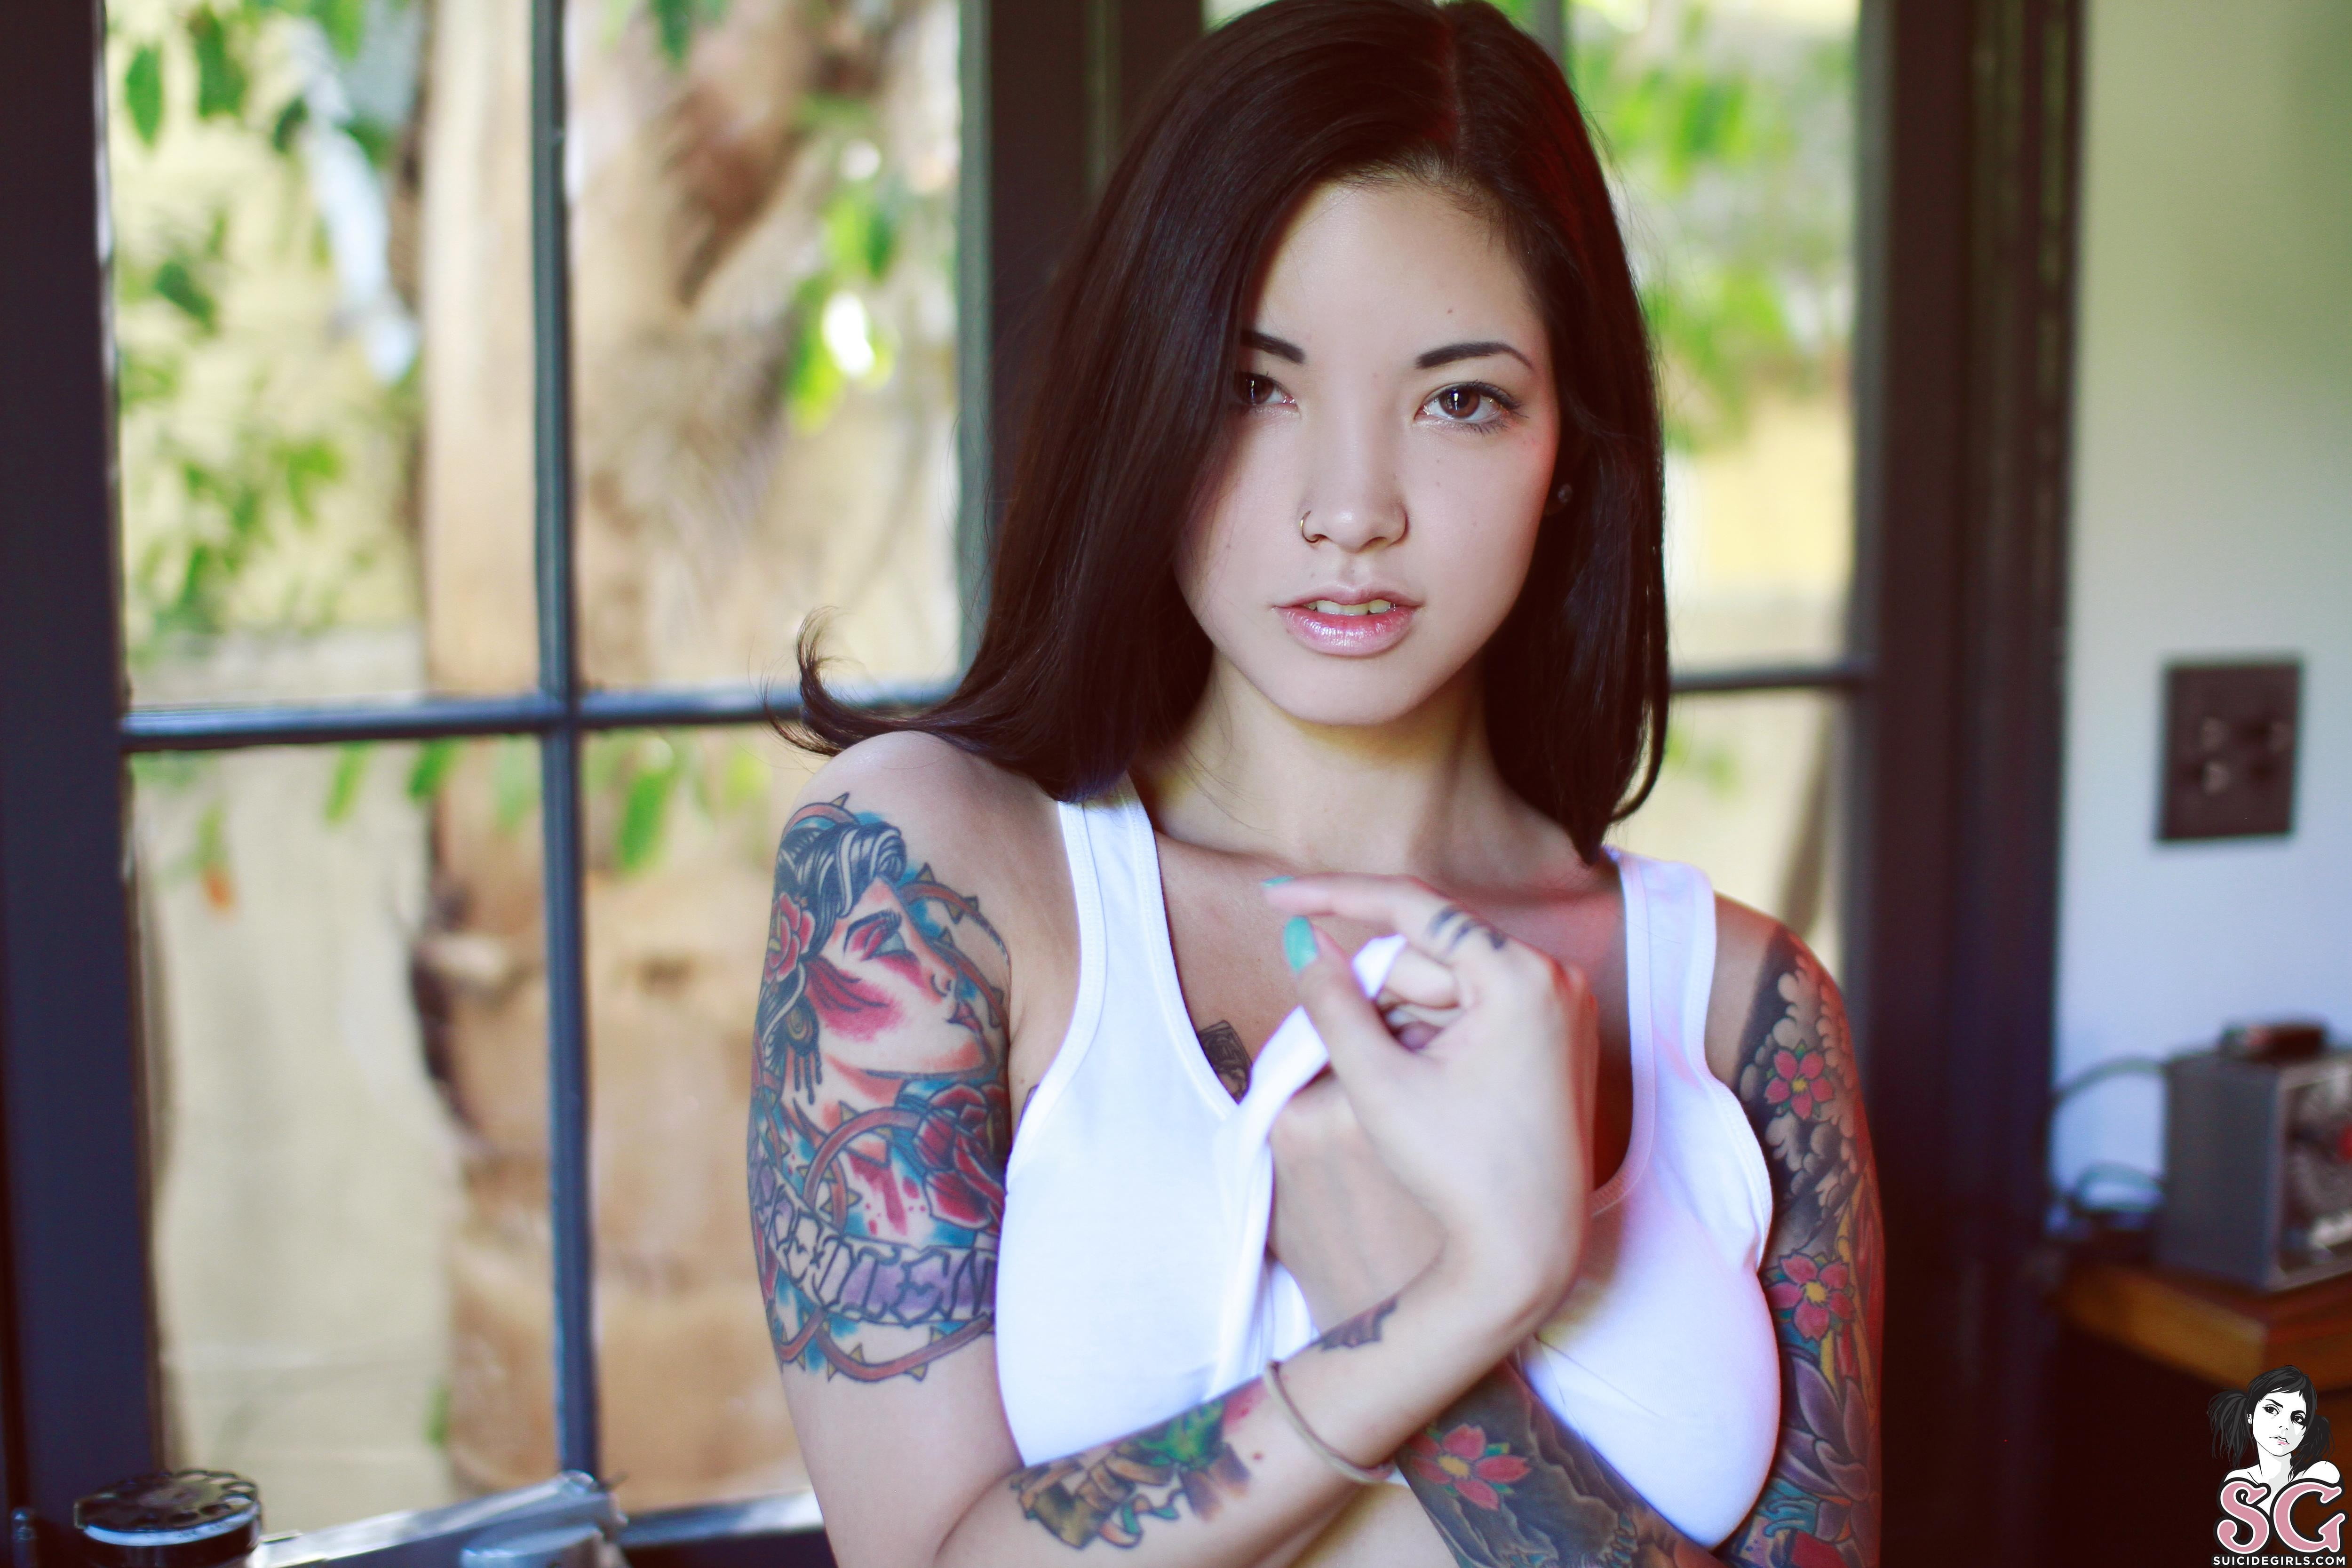 What People Really Think About Women With Tattoos